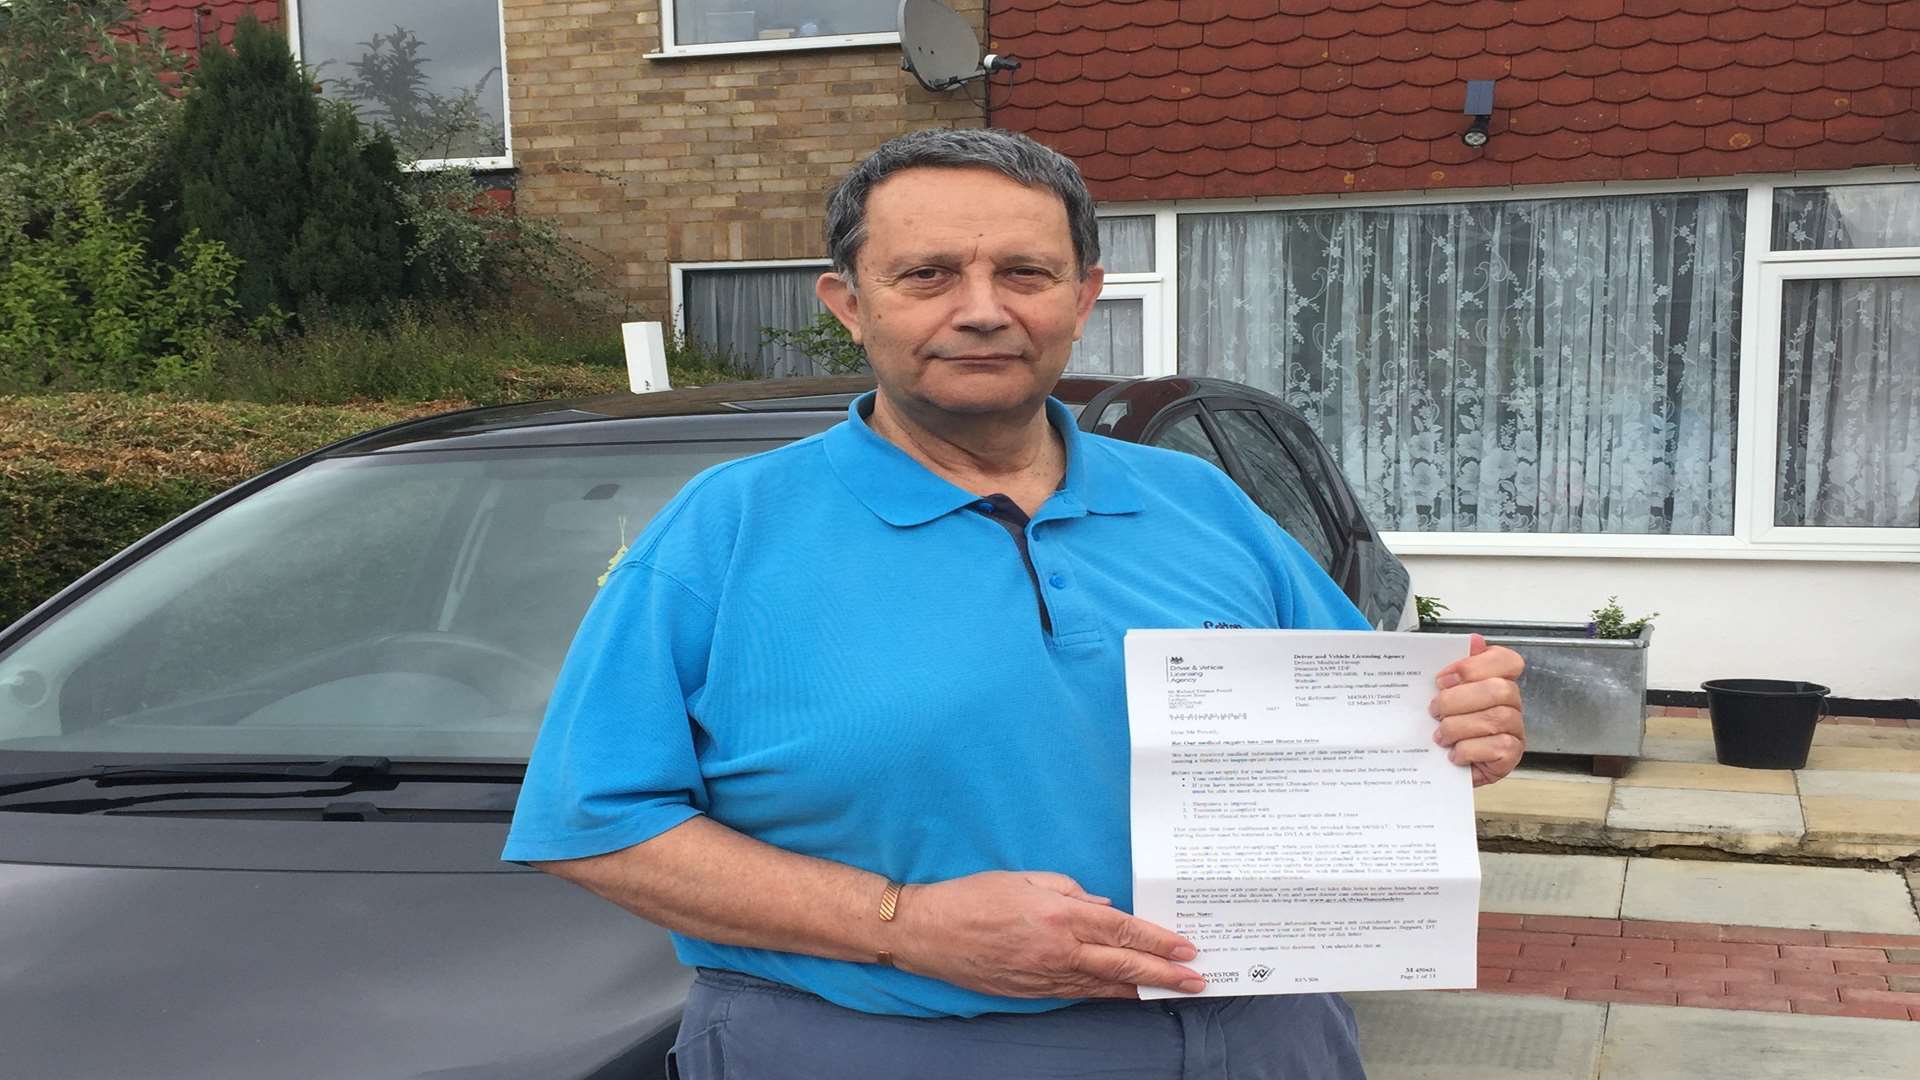 Richard Powell, 71 and of Beacon Road in Lenham was banned from driving by the DVLA after he was diagnosed with sleep apnoea